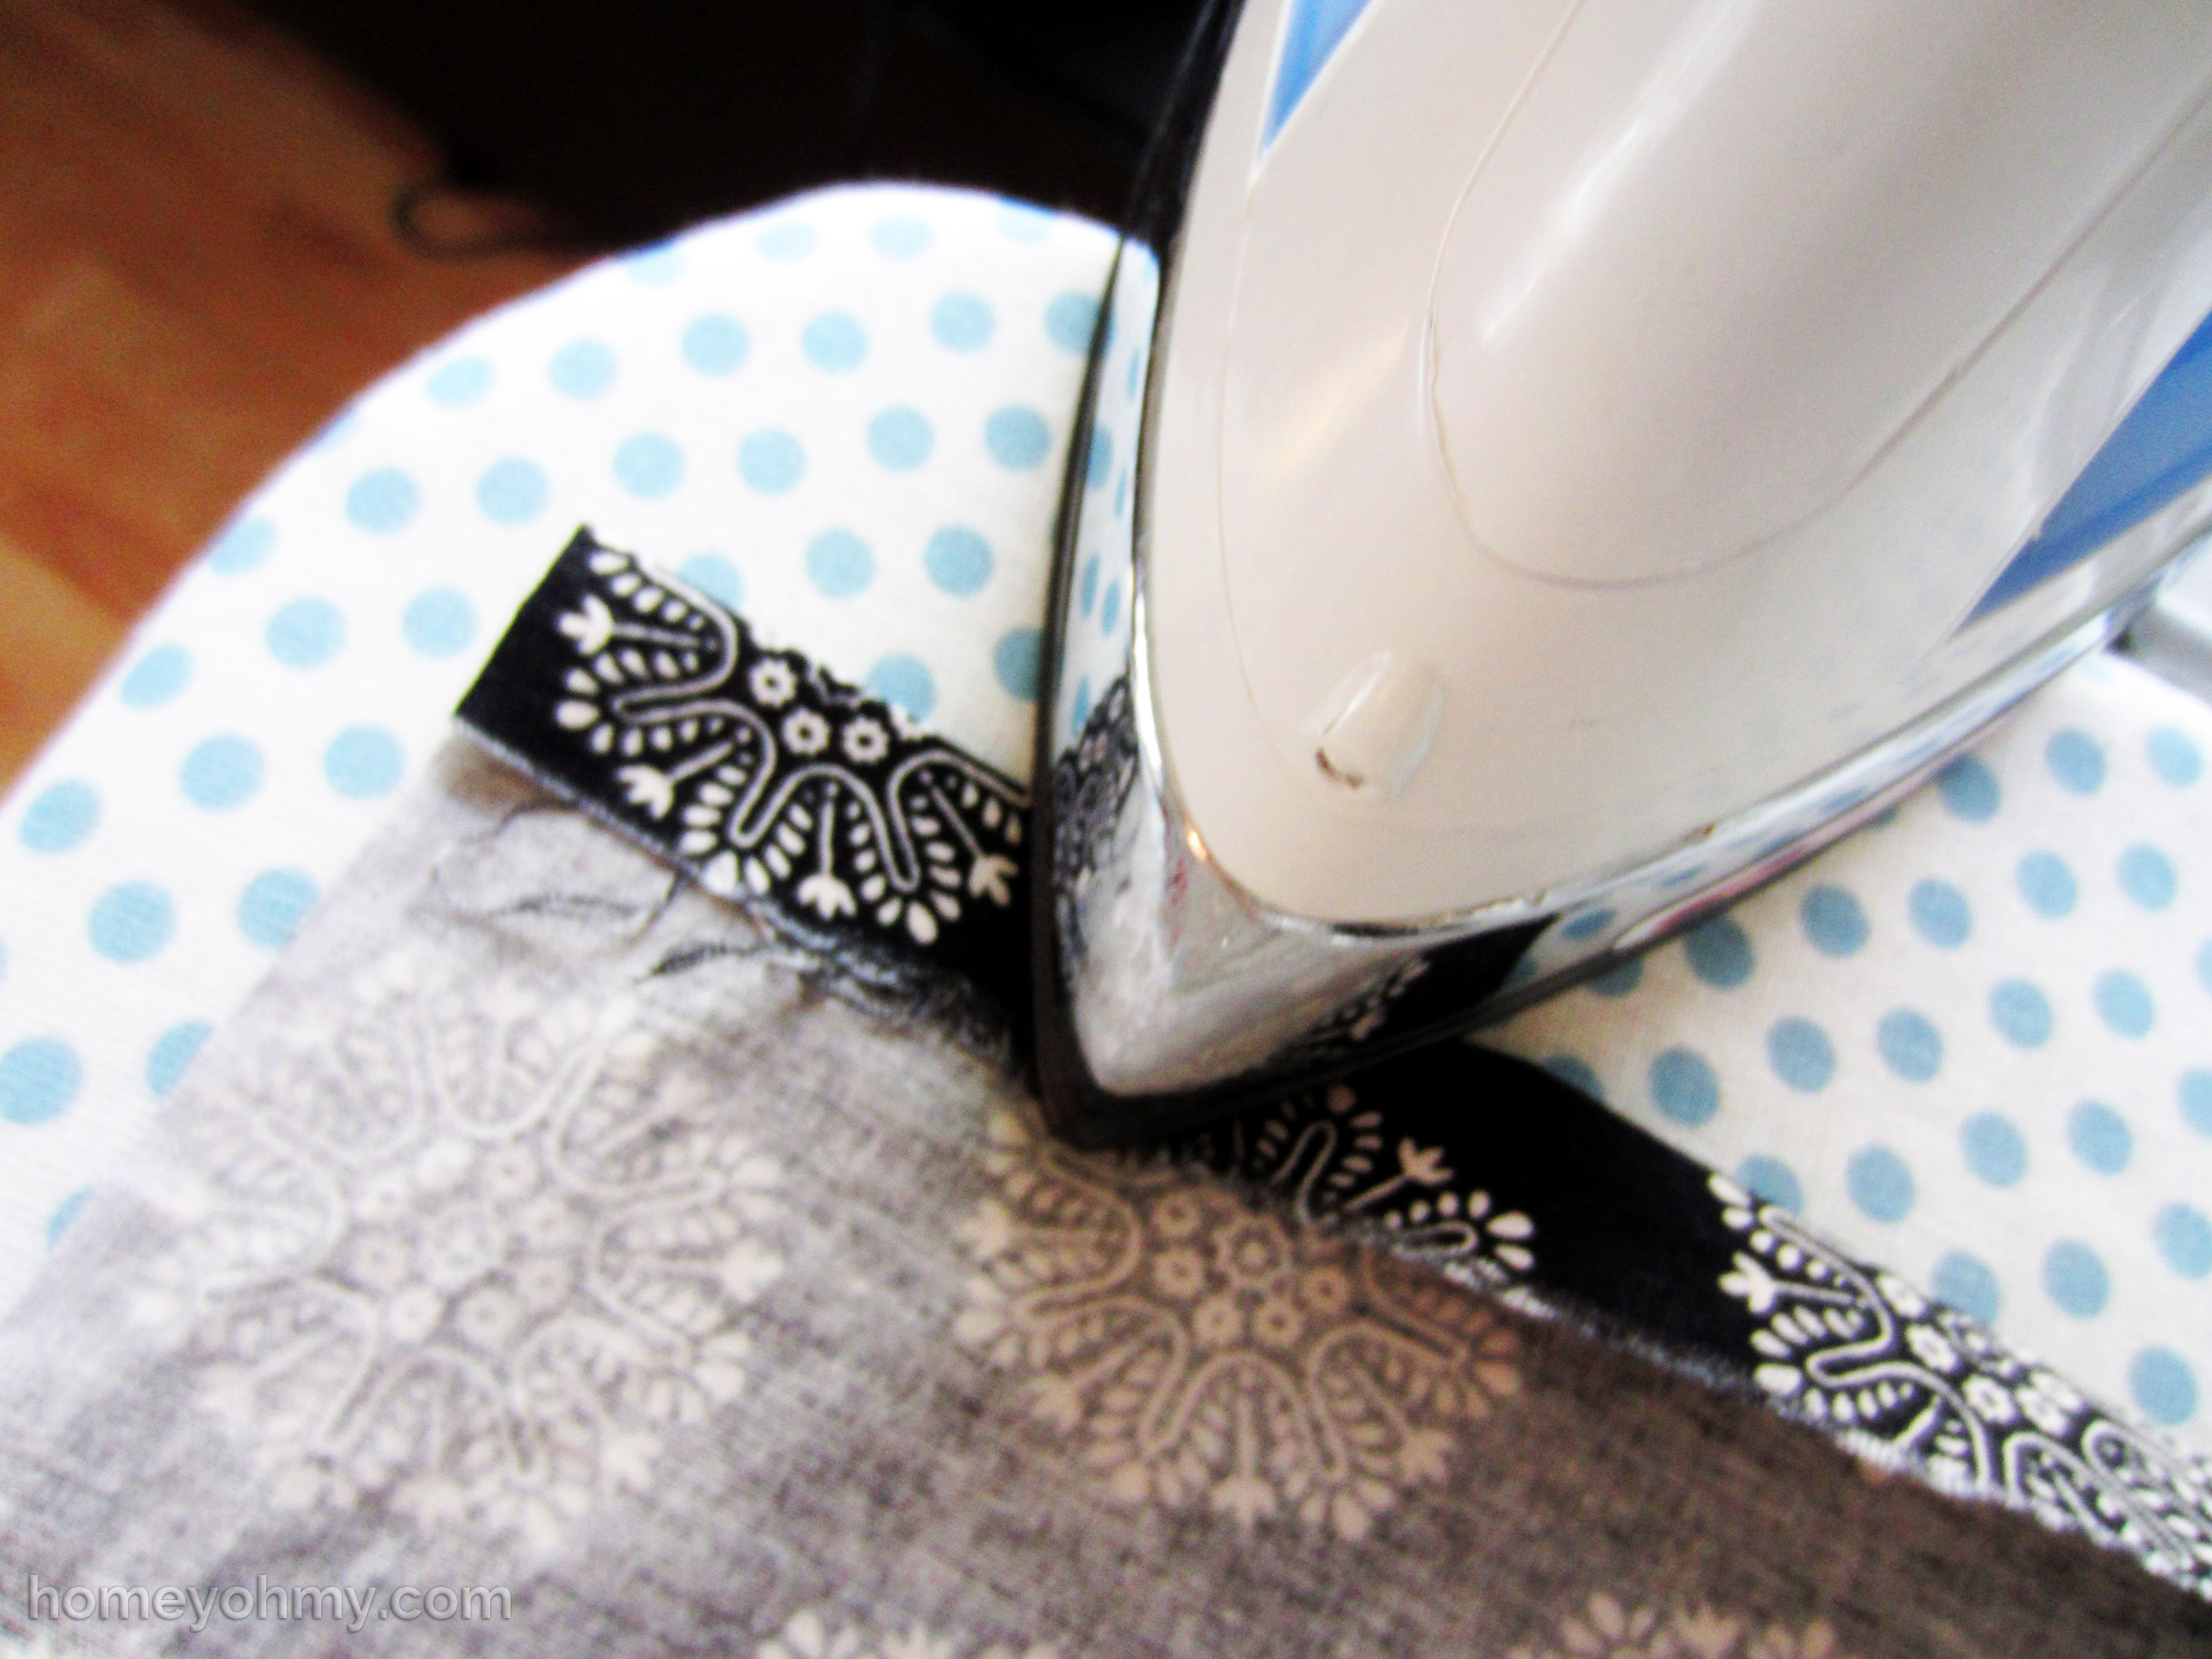 How to Use the Stitch Witch on the No Sew Table Runner 